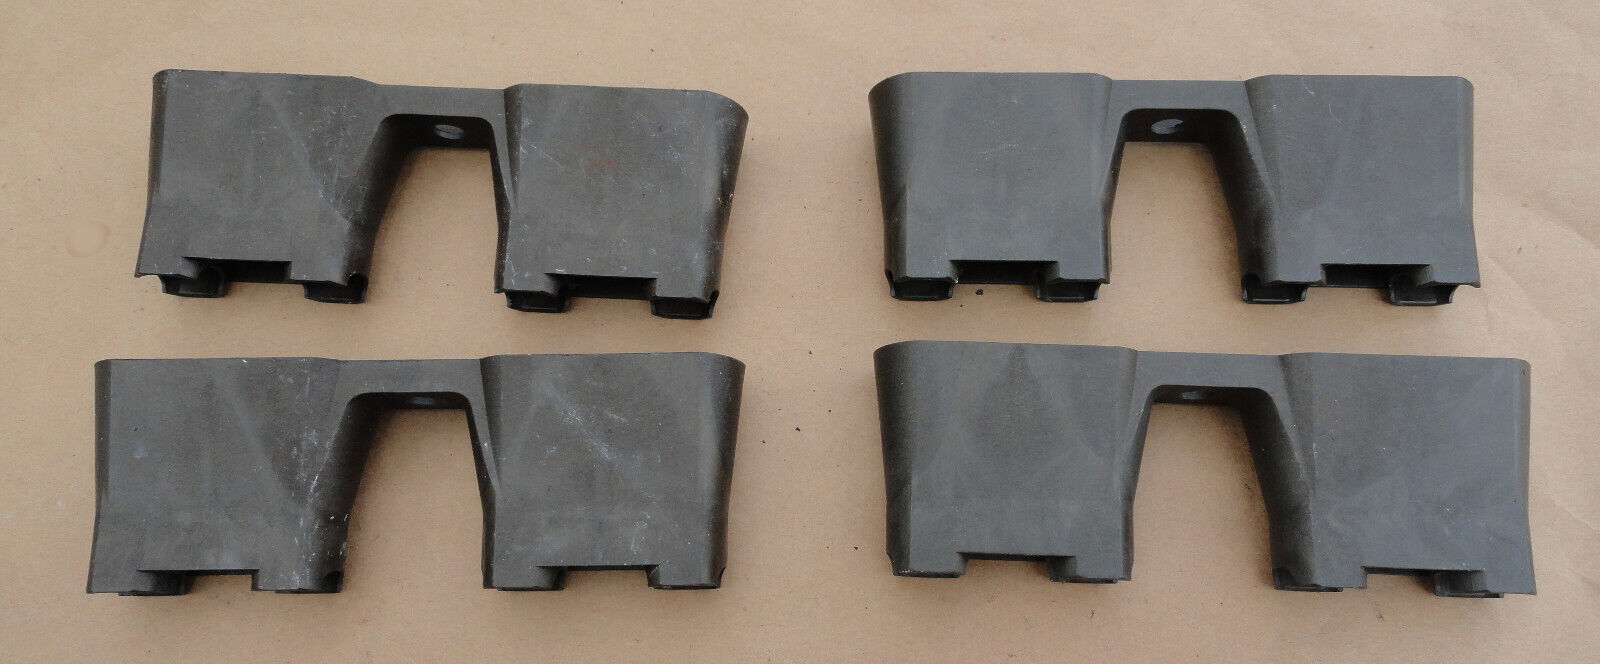 Primary image for LS1 LS6 LQ9 LQ4 Lifter Guide Retainer Trays Set of 4 05983